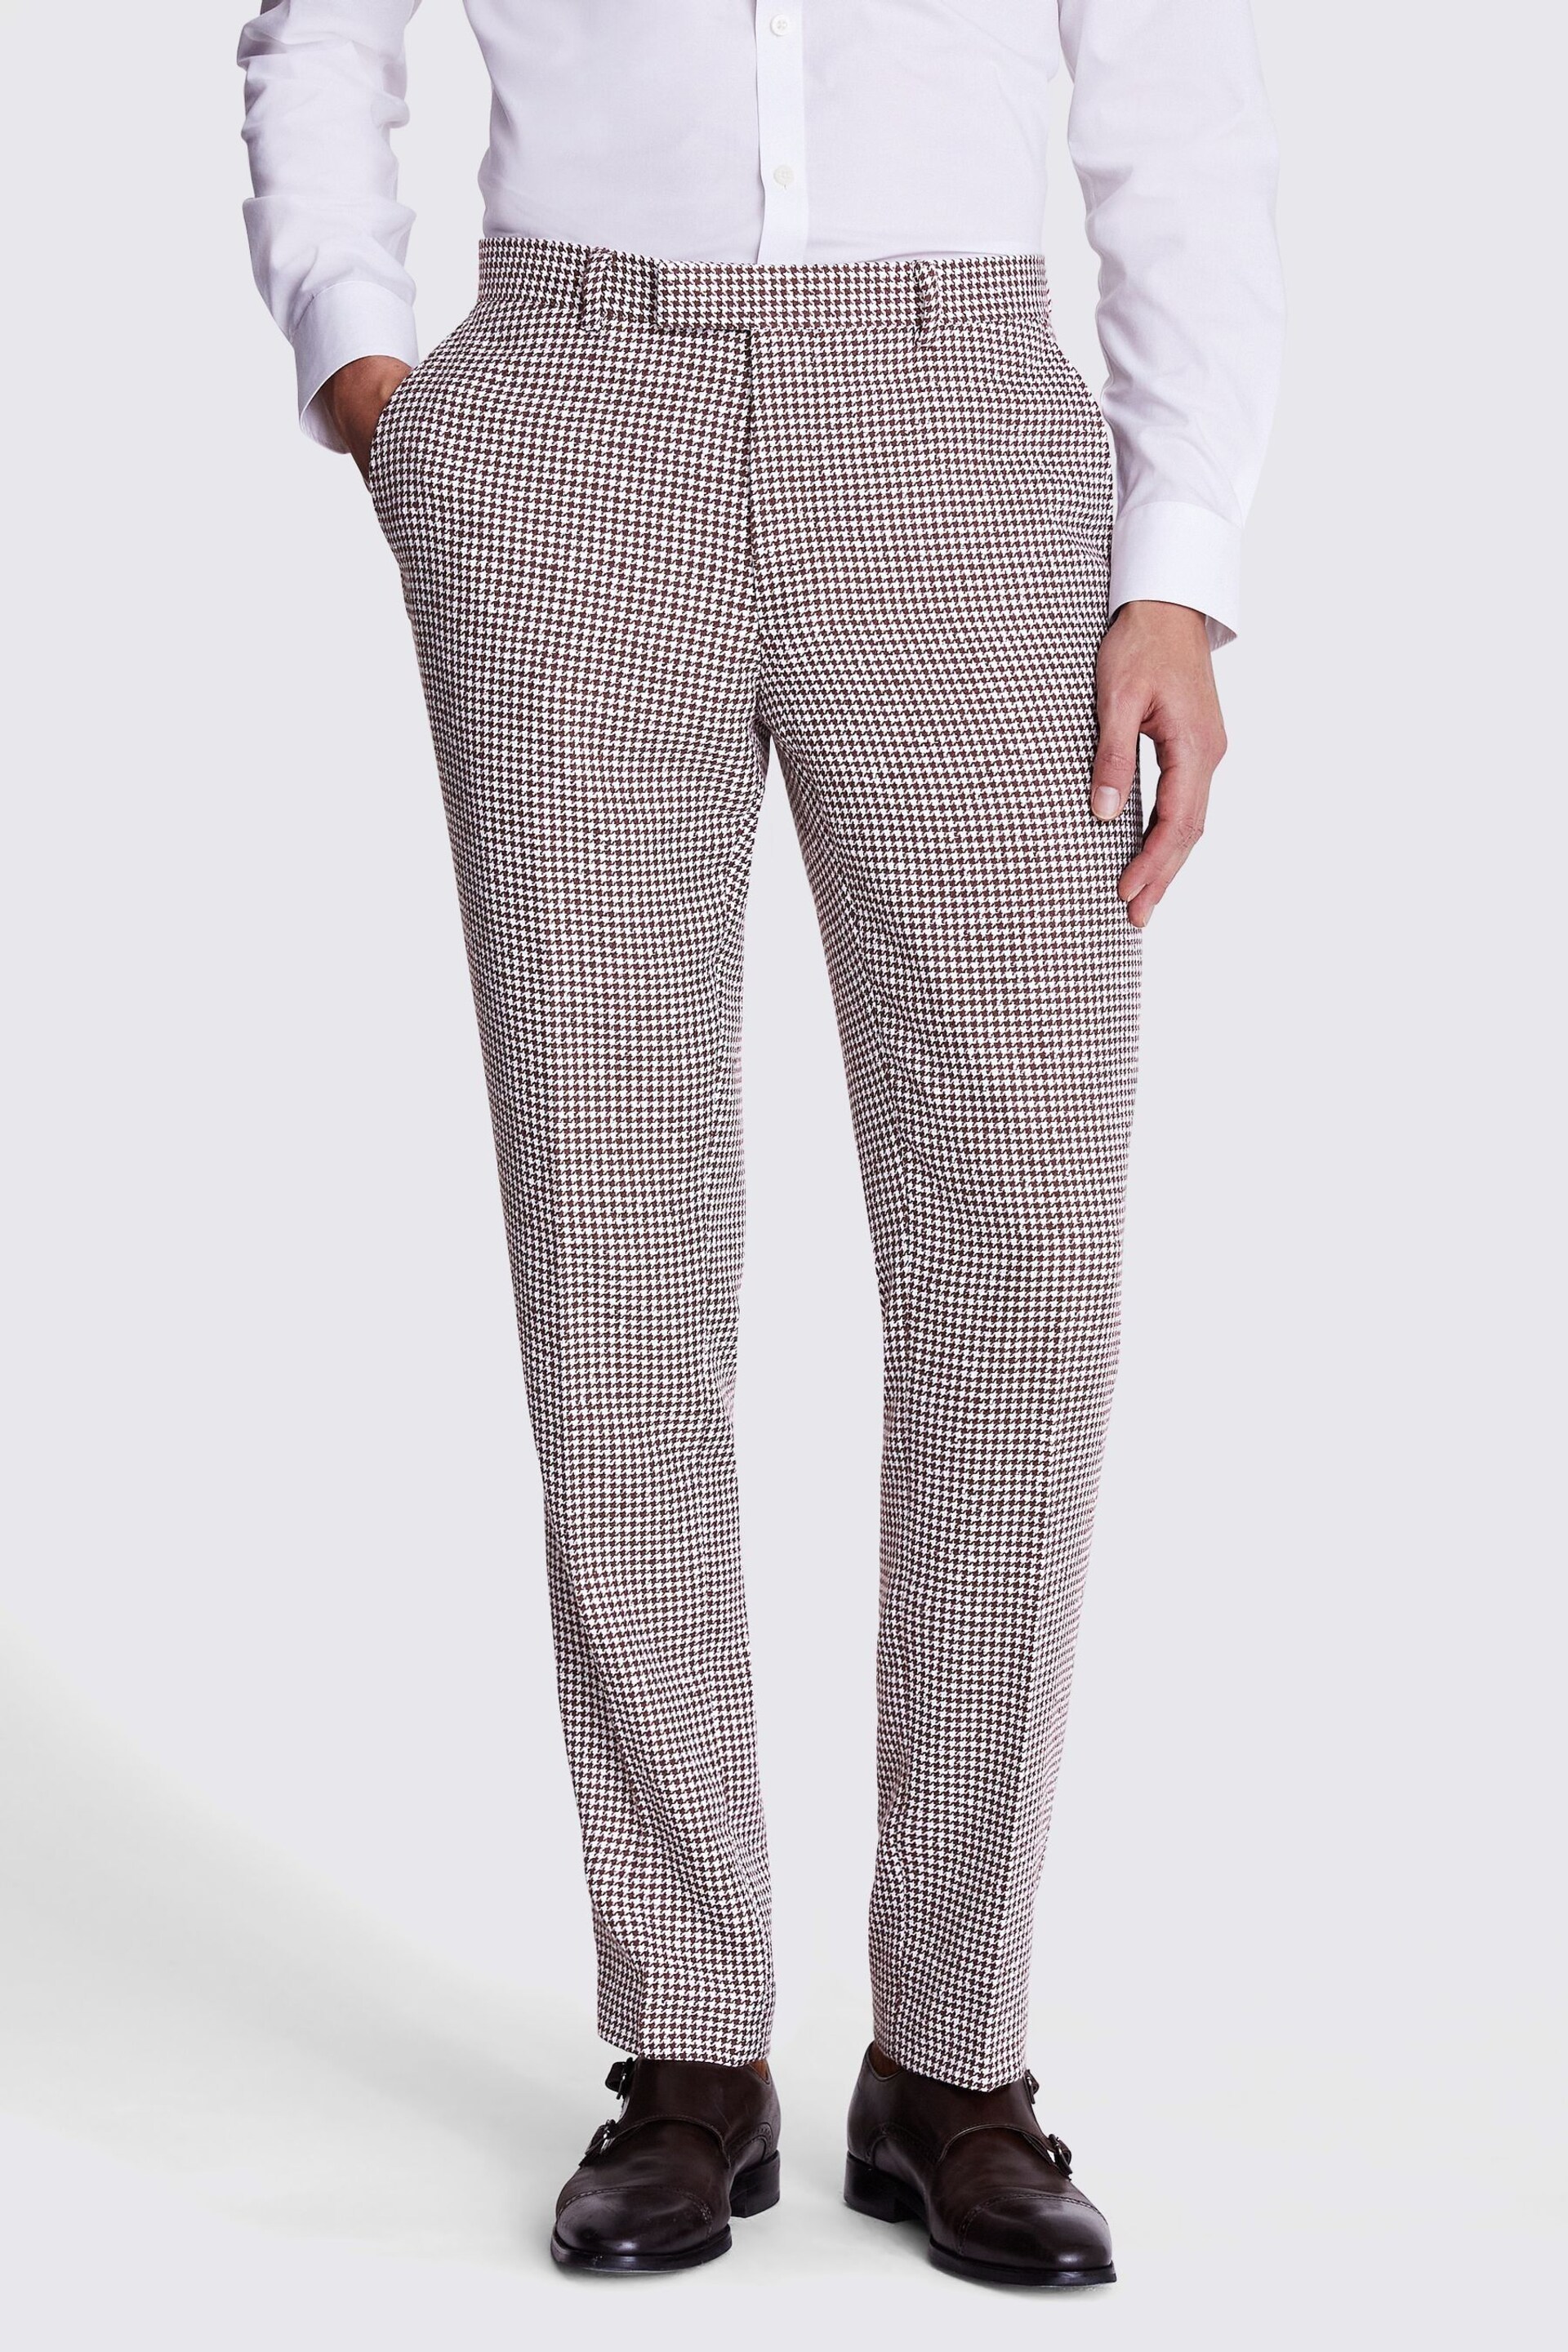 MOSS Tailored Fit Orange Houndstooth Trousers - Image 1 of 3